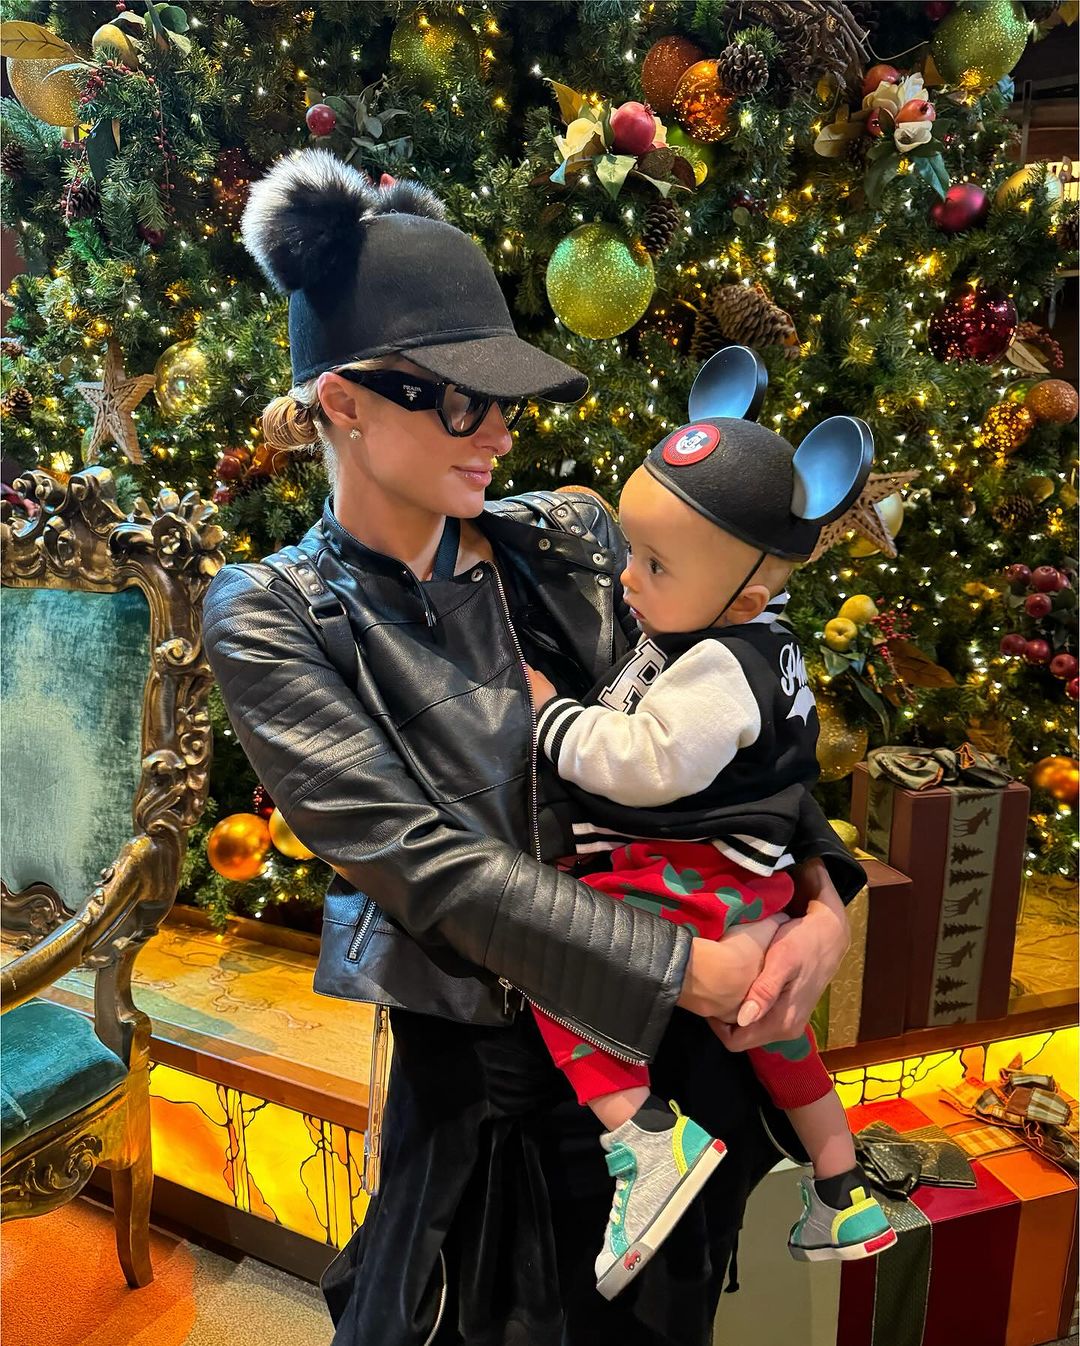 Paris Hilton celebrated Christmas with her baby at Disneyland